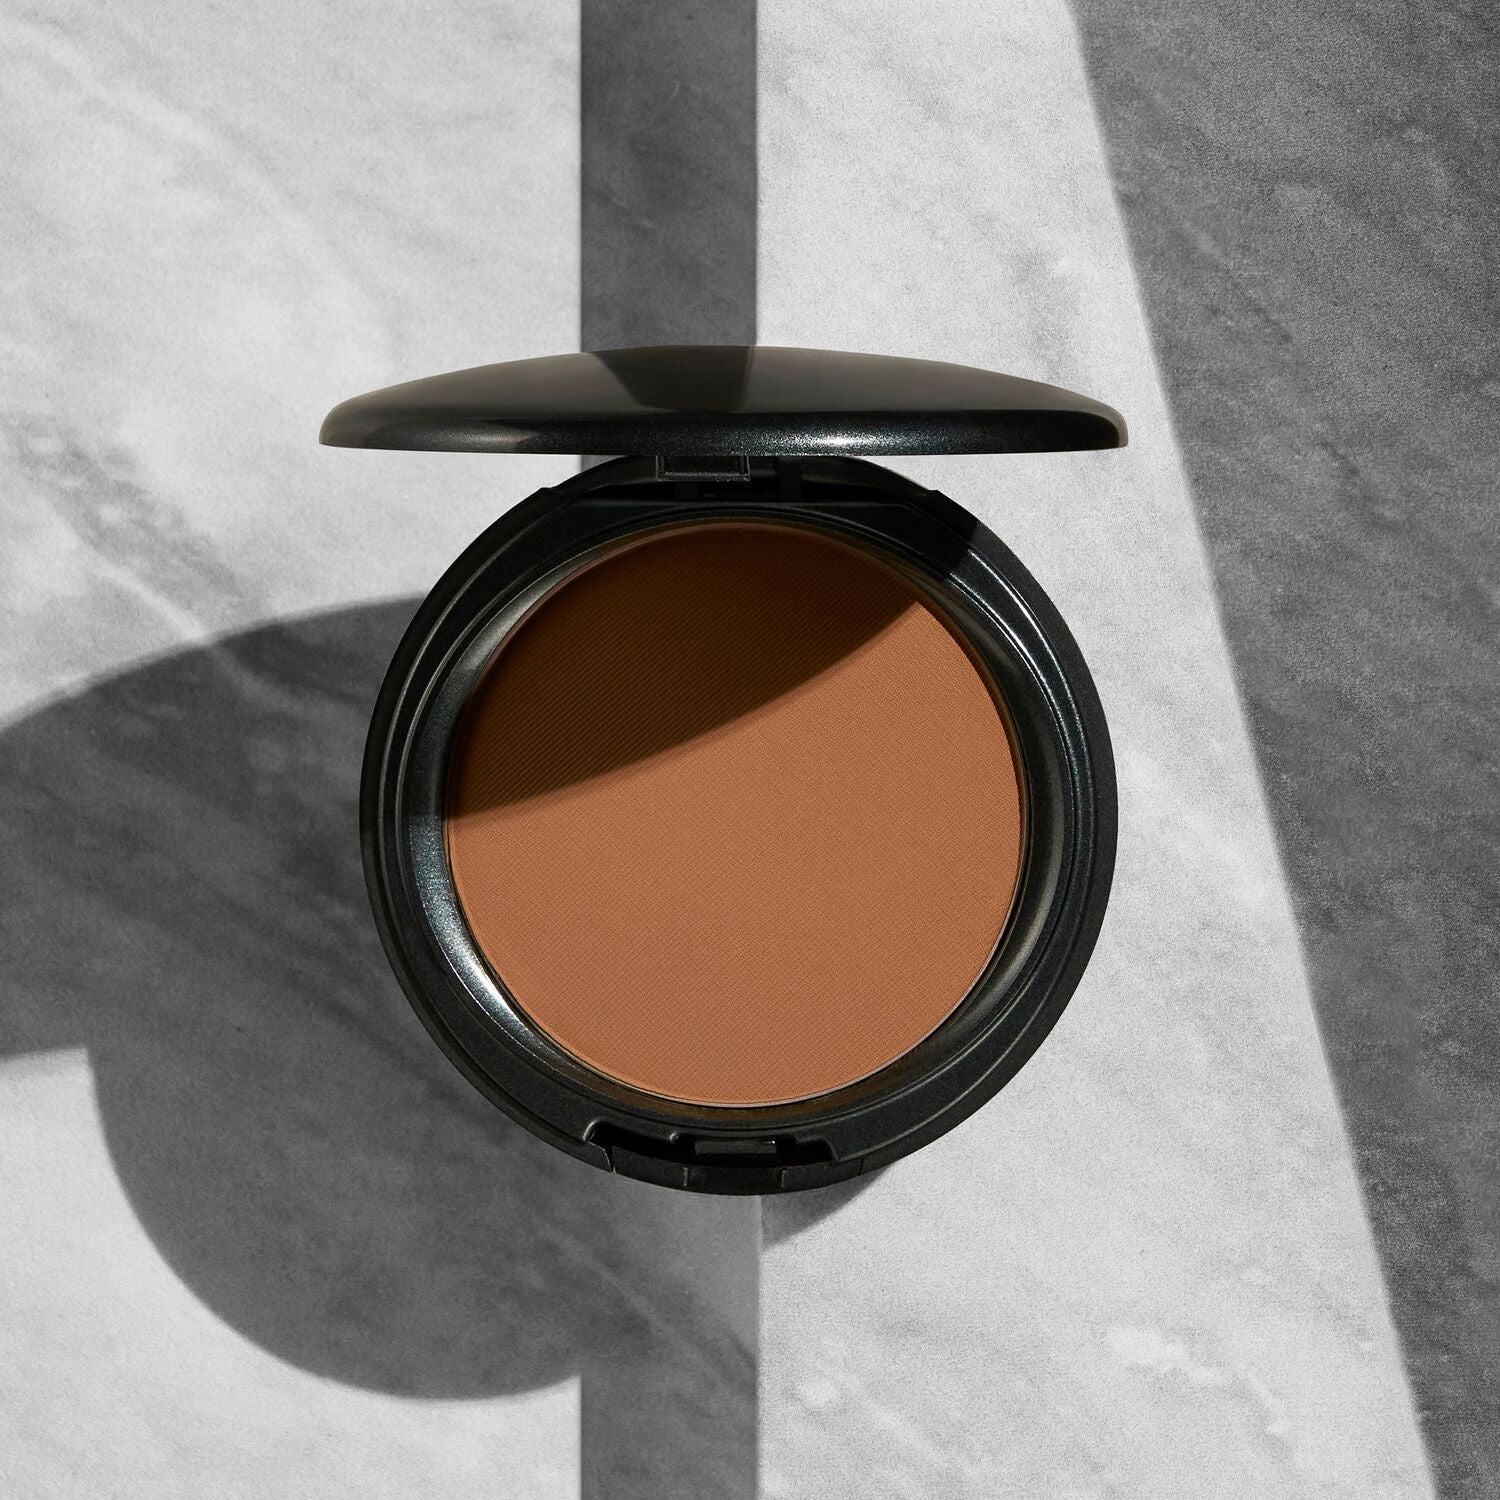 Coverfx Pressed Mineral Foundation in shade D1